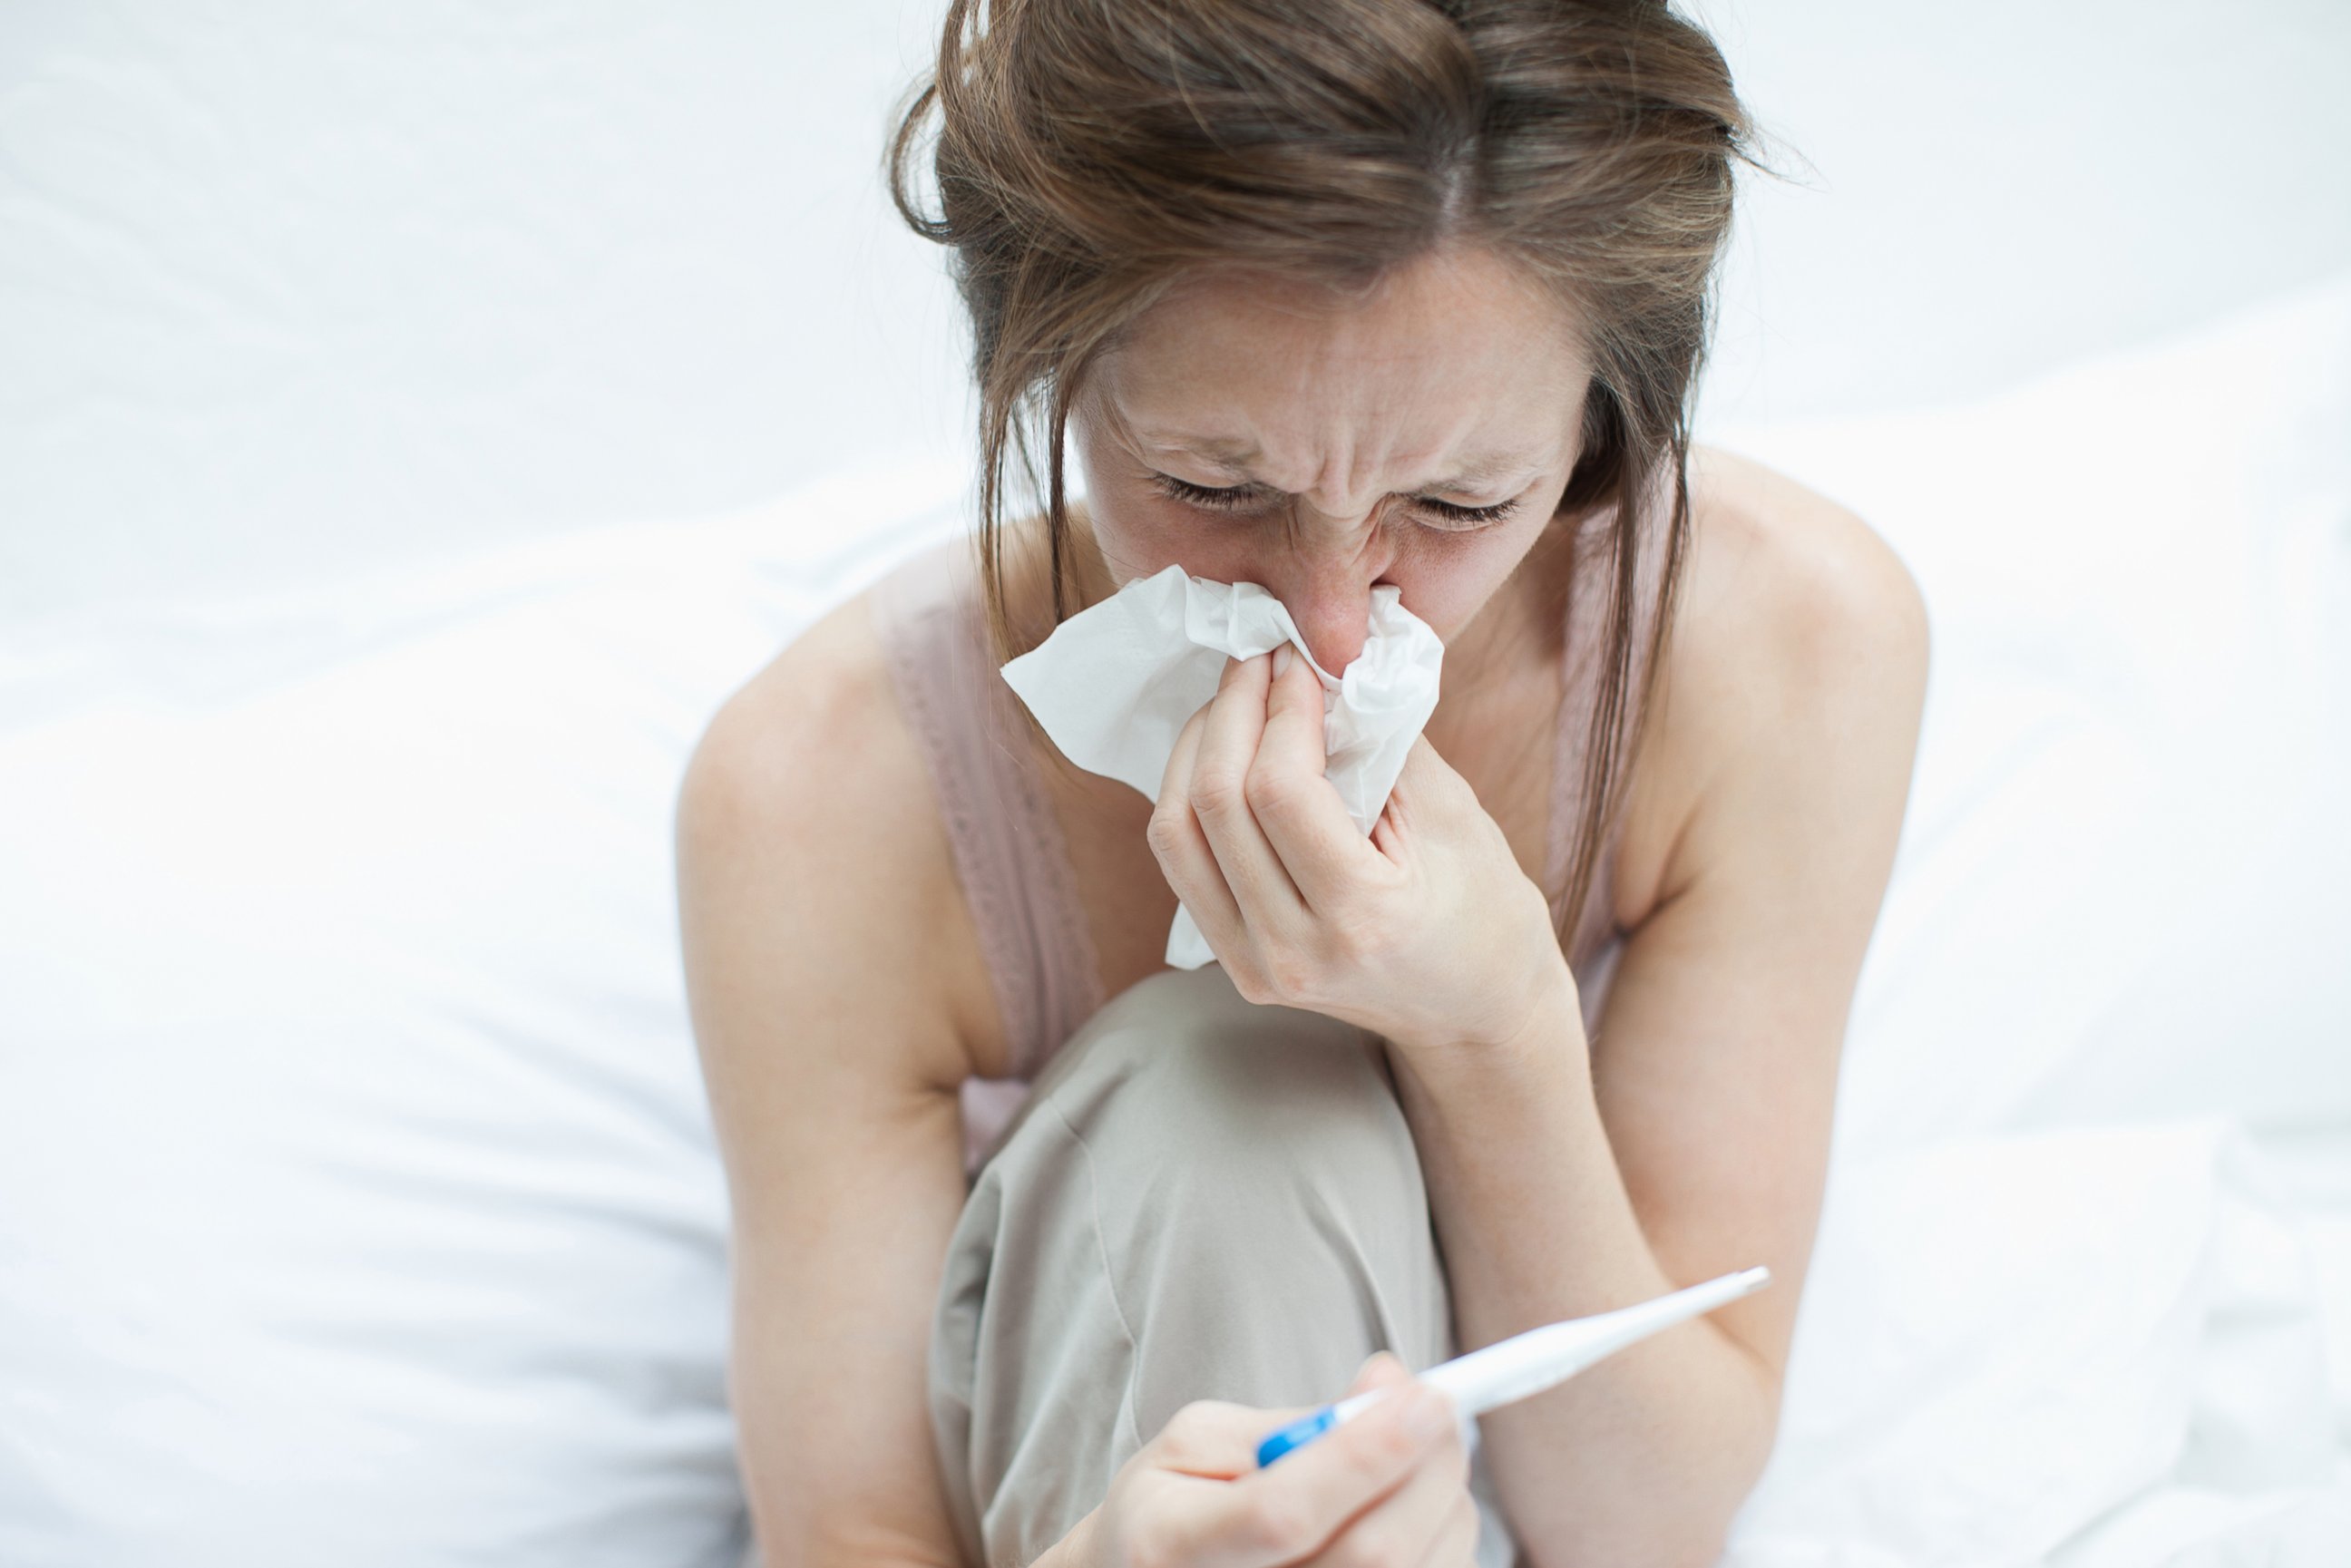 PHOTO: As many as 39,000 people die each year due t complications form the flu, according to the CDC.